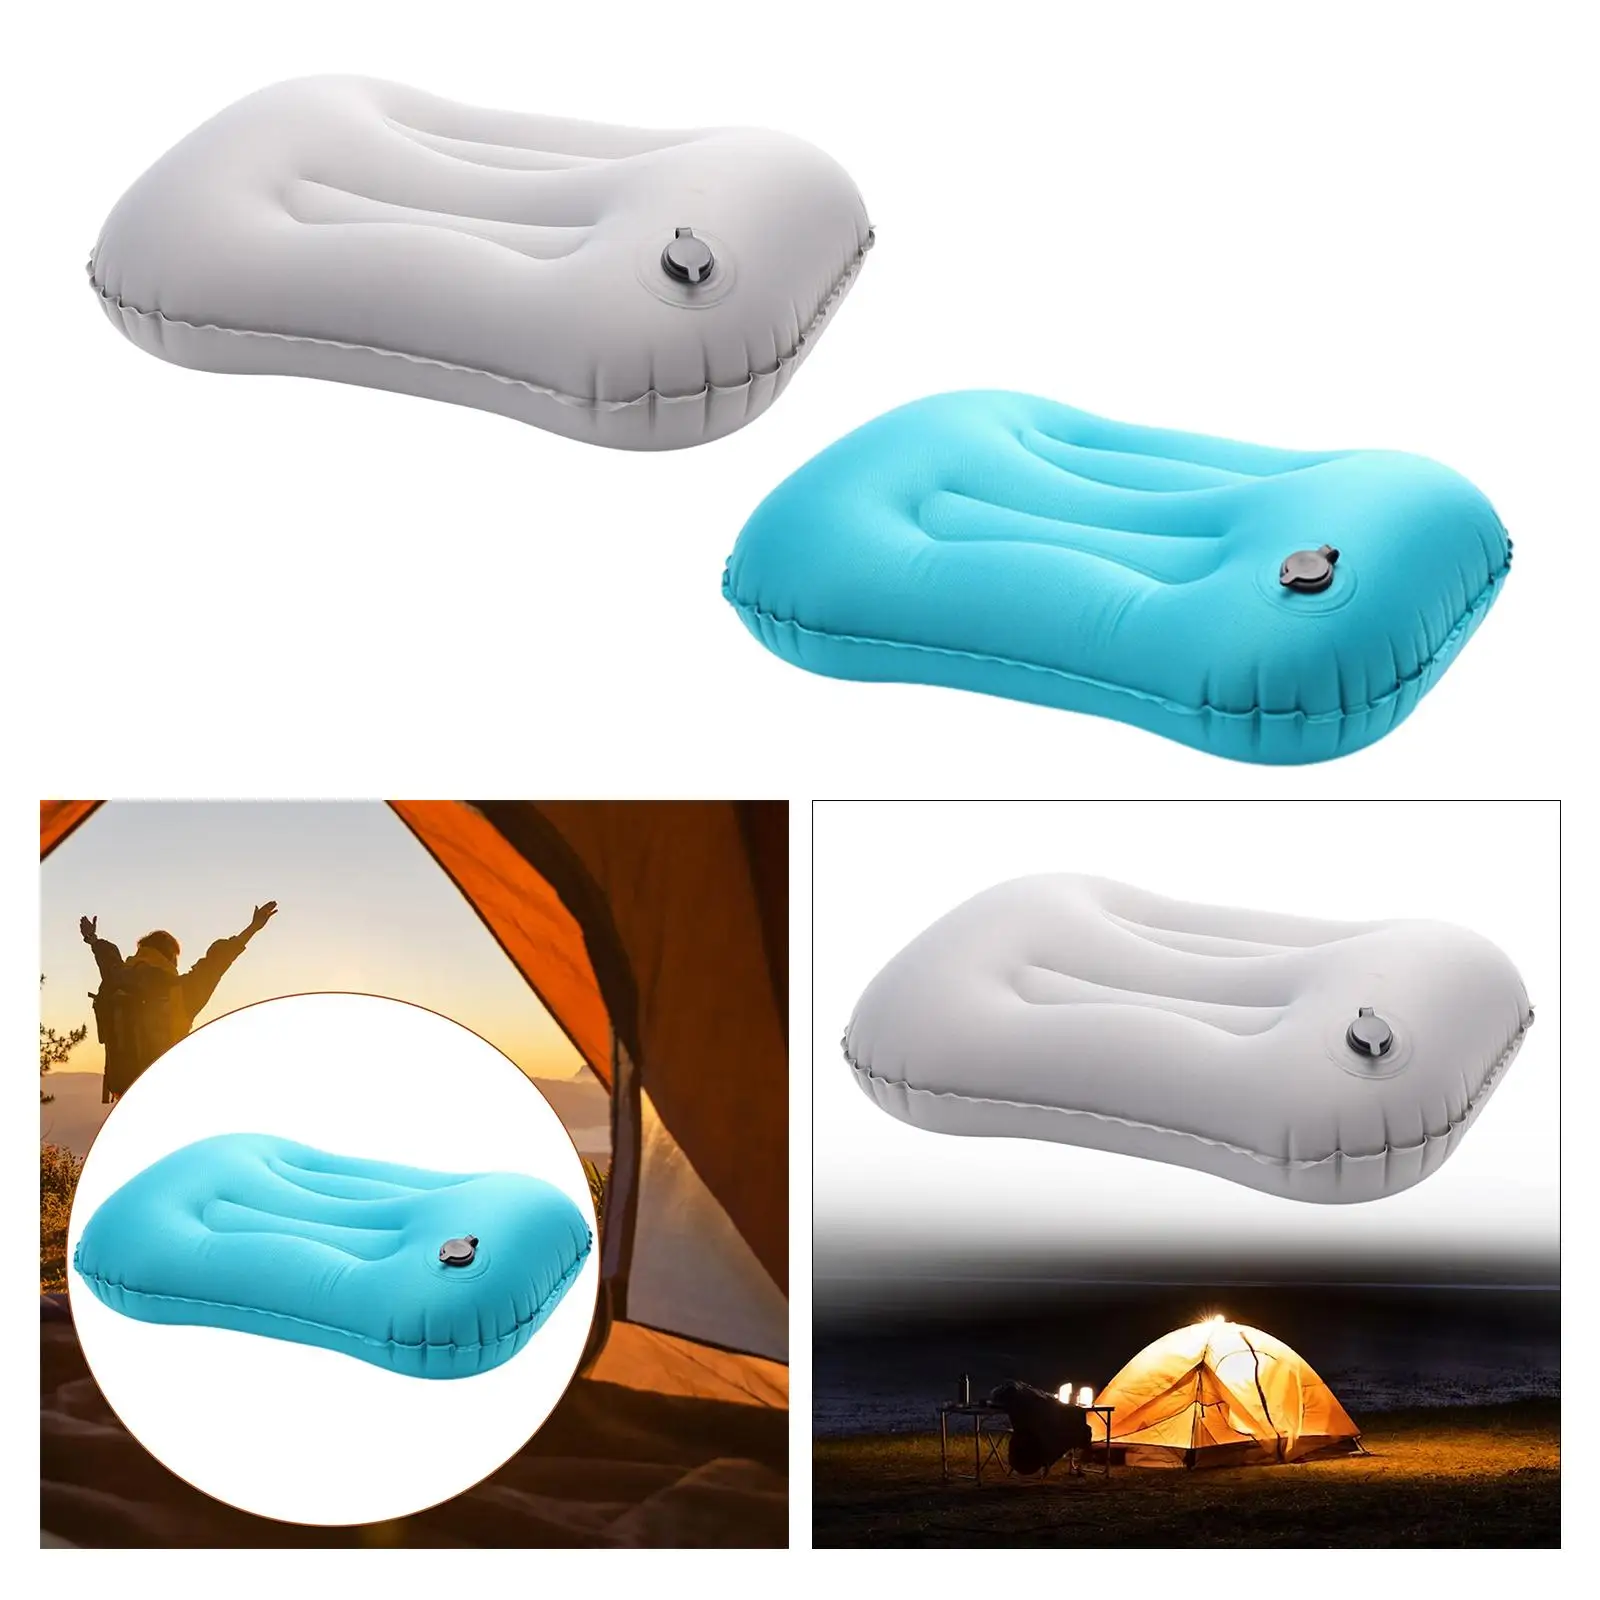 Inflatable Camping Pillow Plane Air Pillow for Neck Support Cushion Travel Pillow for Backpacking Hiking Hammock Traveling Beach